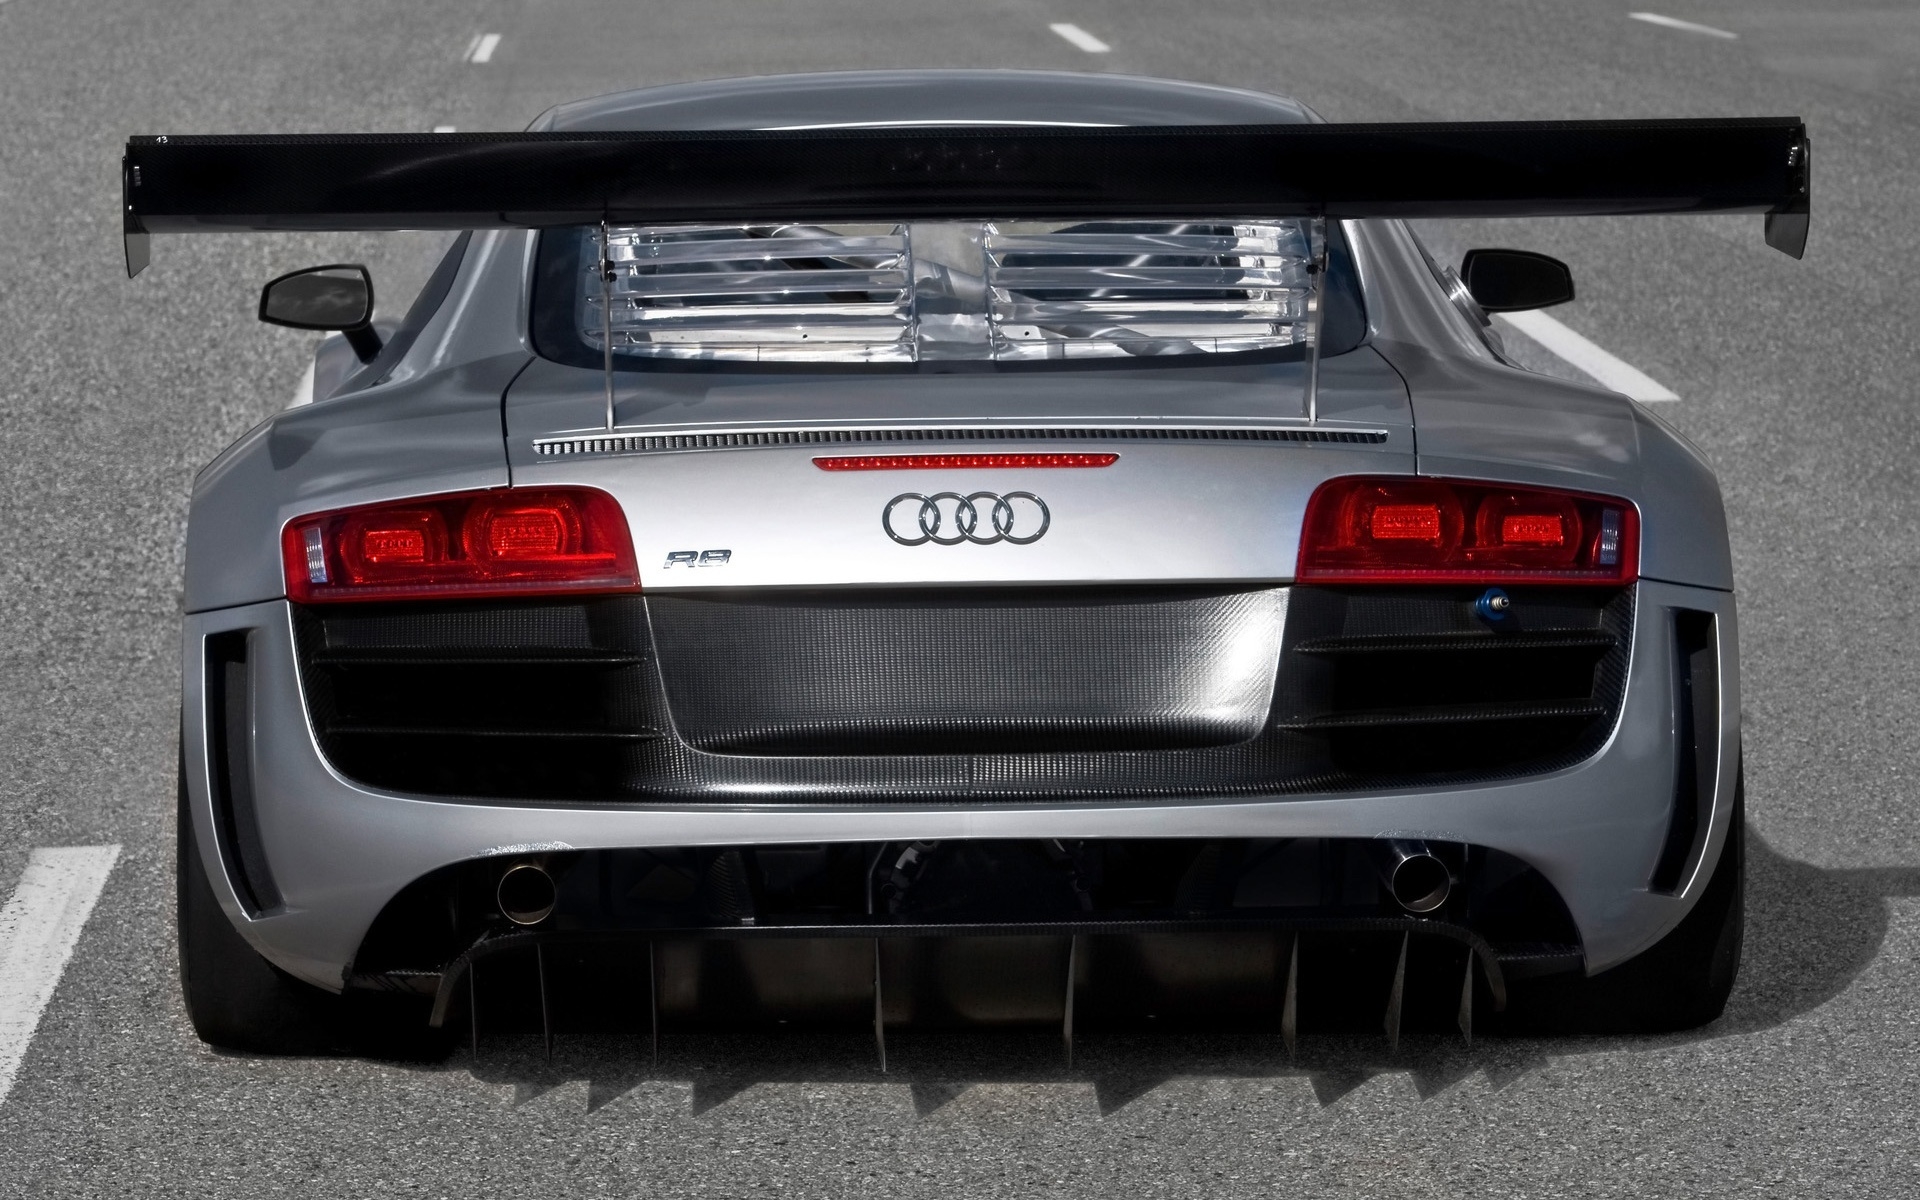 2009 Audi R8 GT3 - Rear for 1920 x 1200 widescreen resolution